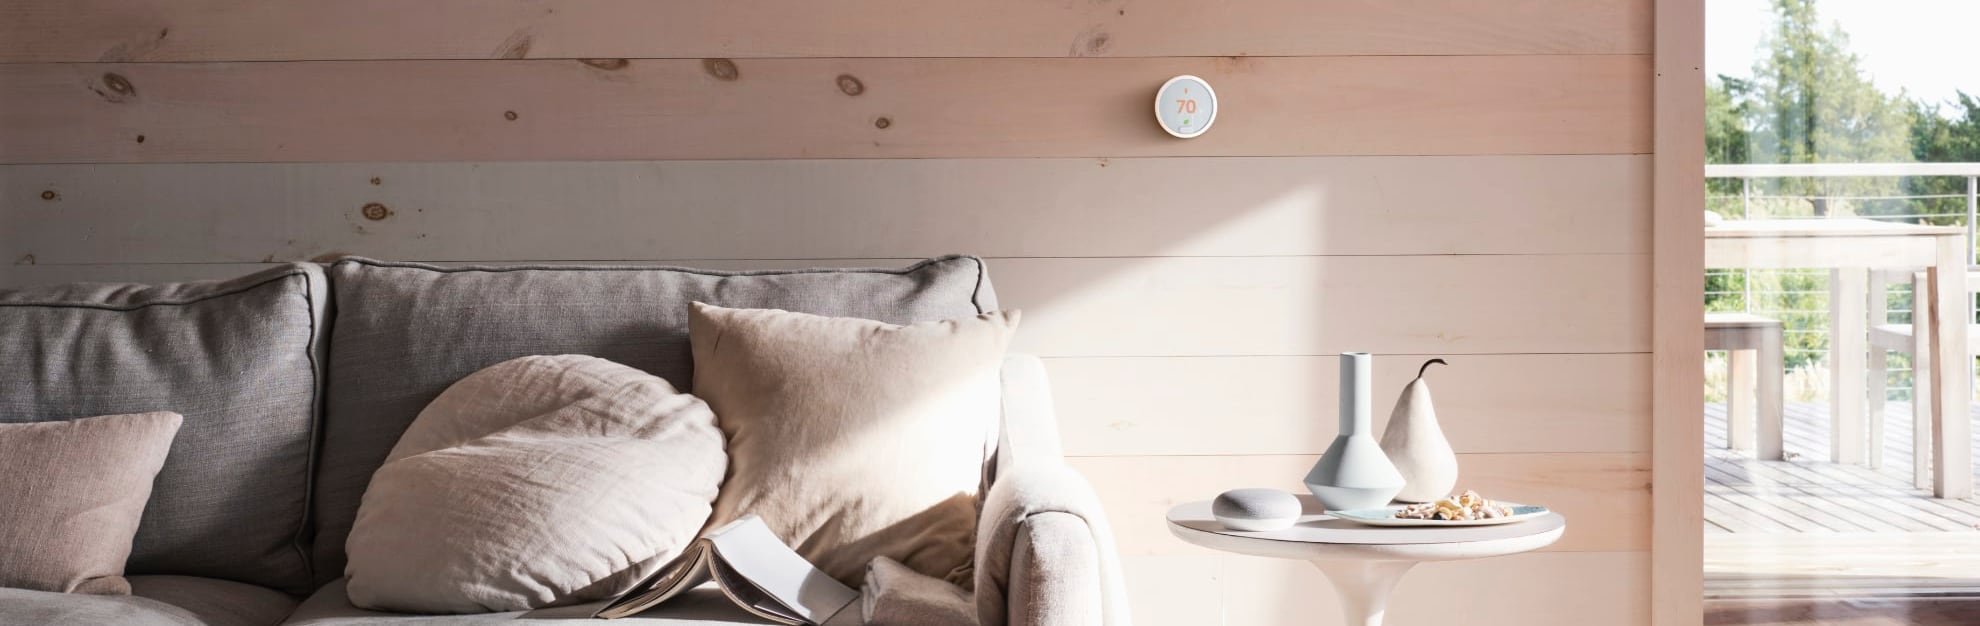 Vivint Home Automation in Long Island